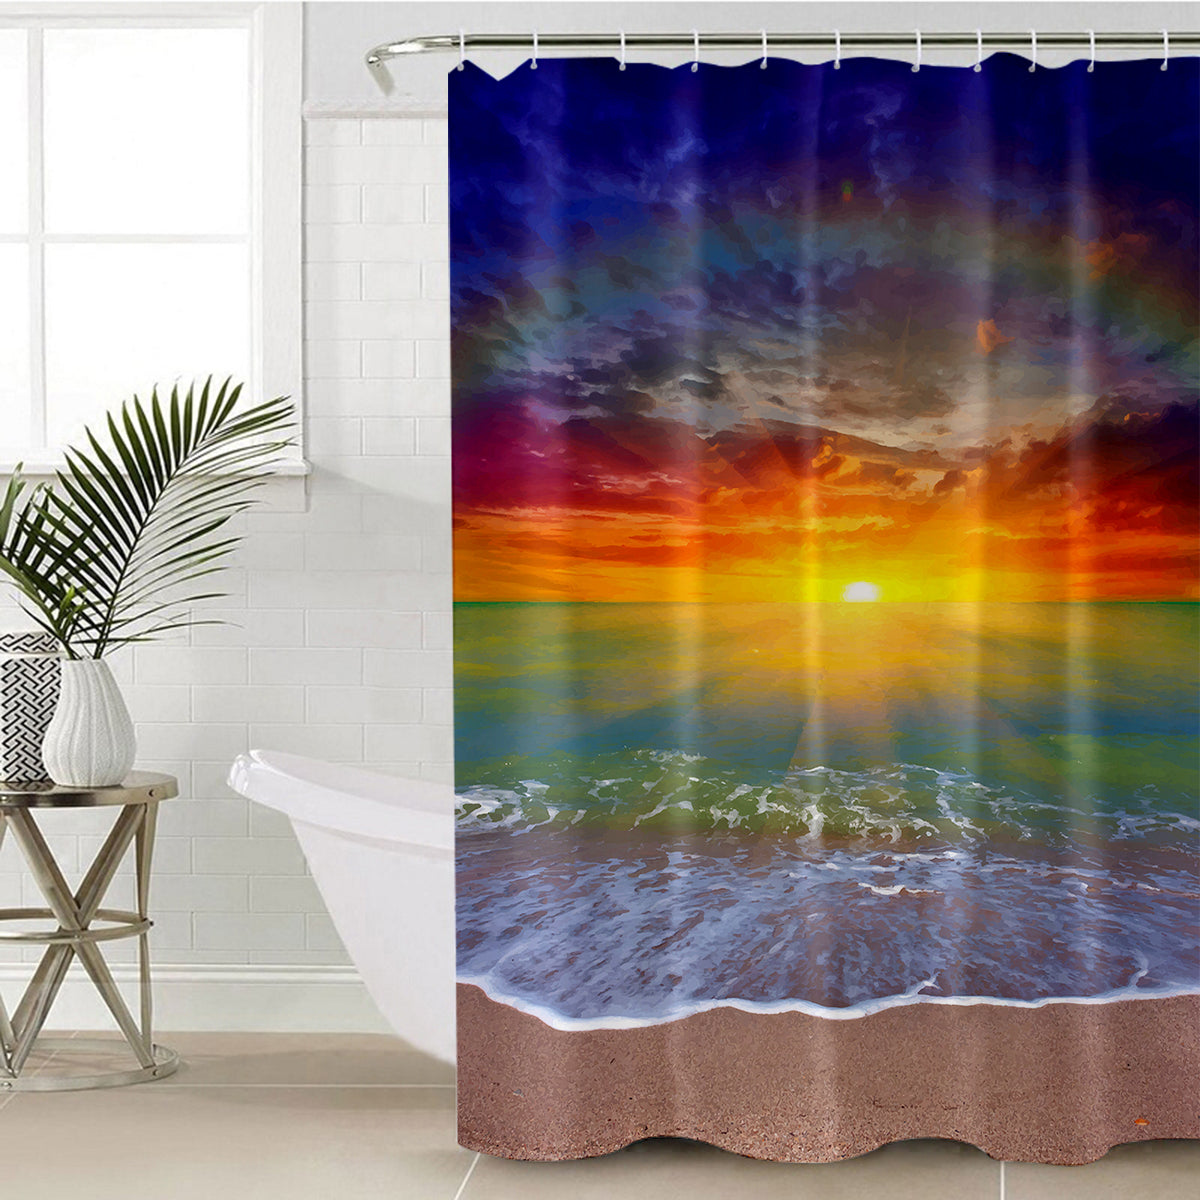 Coastal Passion Bathroom | Sunset At The Jetty Shower Curtain